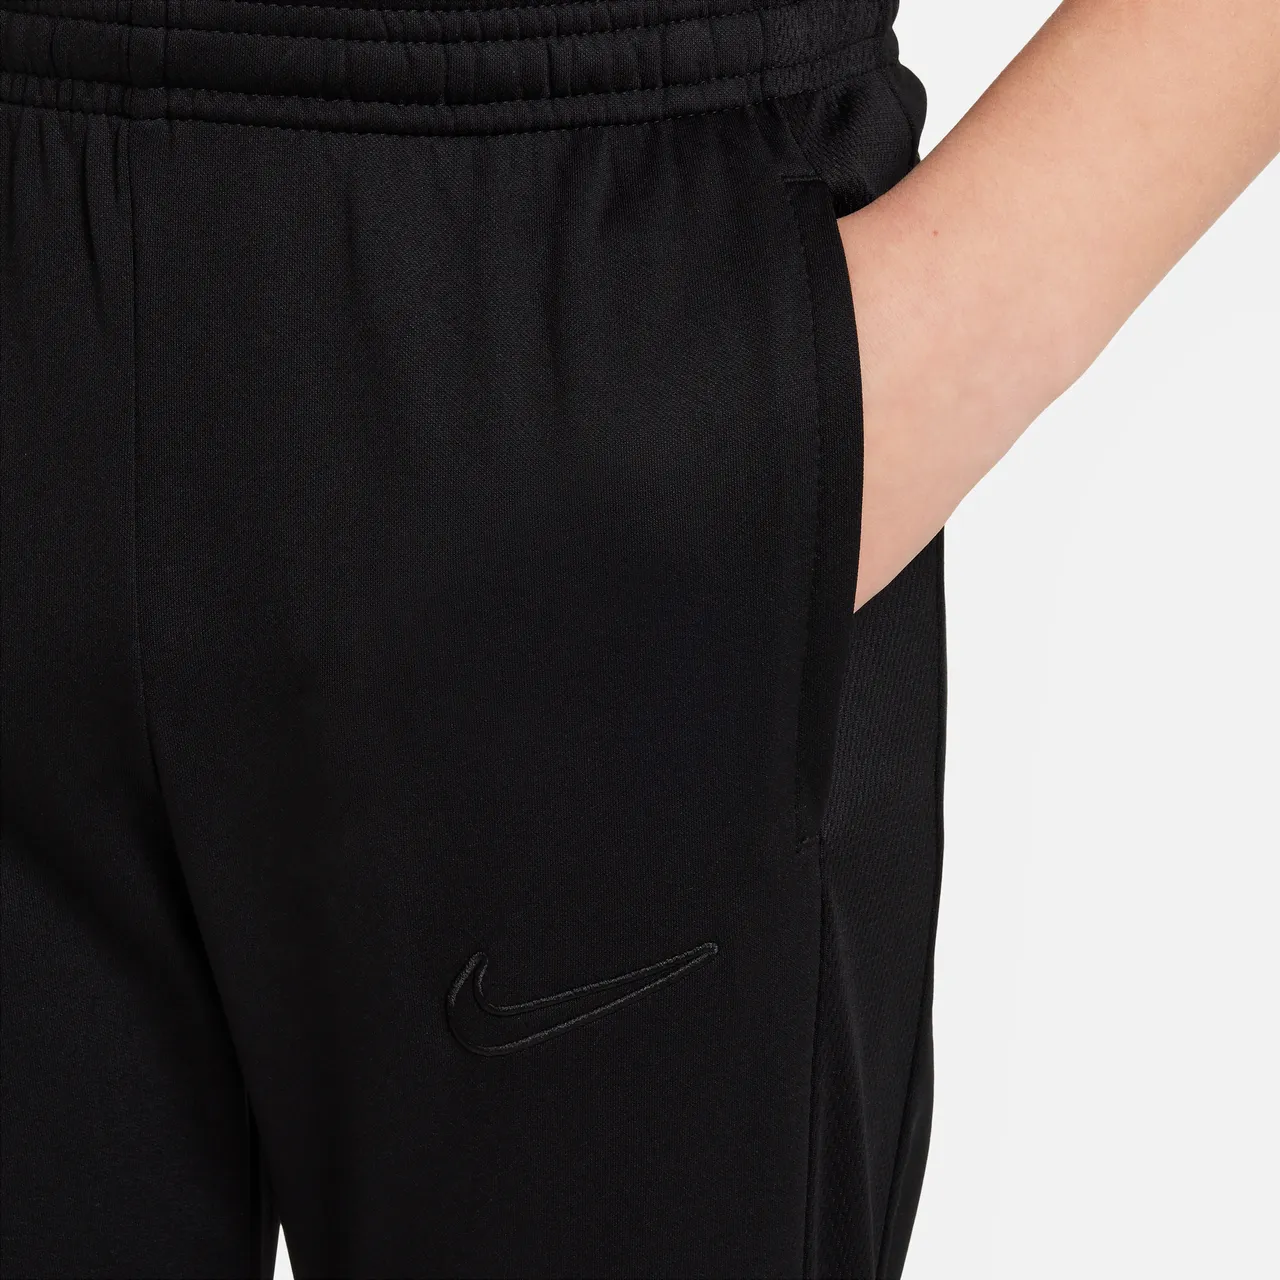 Nike Dri-FIT Academy23 Kids' Football Trousers - Black - Polyester